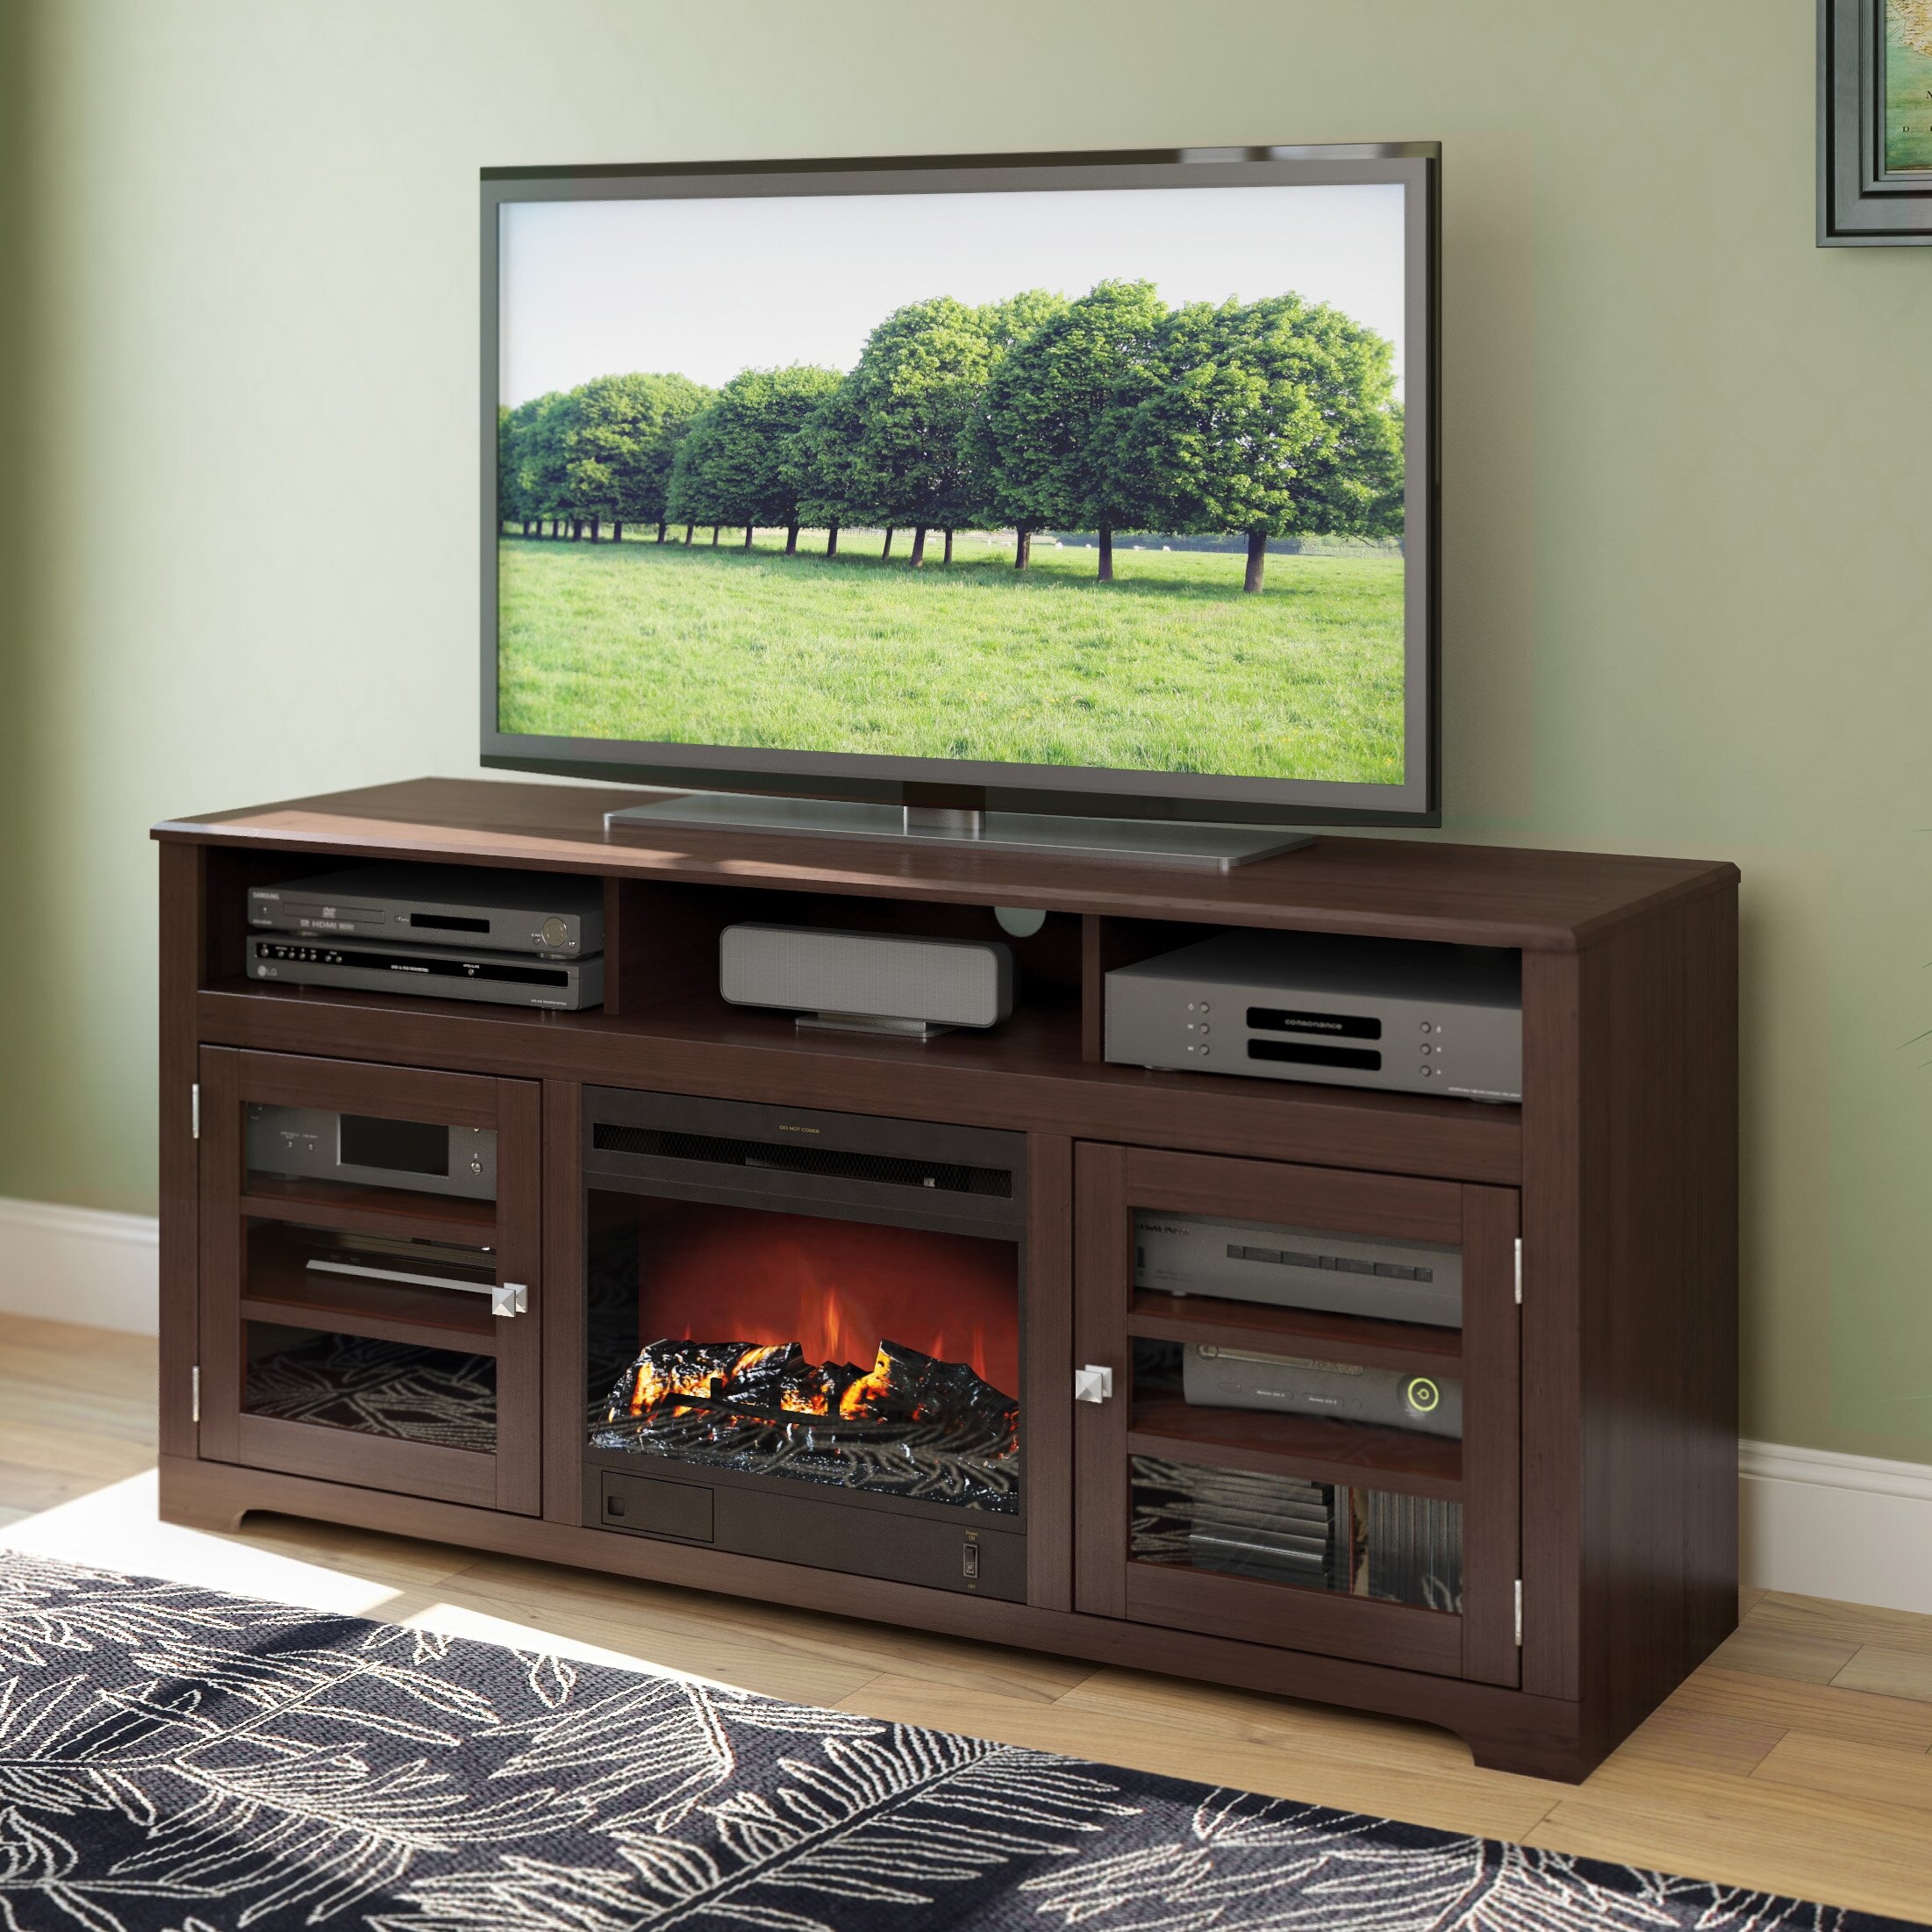 Robbin TV Stand for TVs up to 65 inches with Electric Fireplace Included